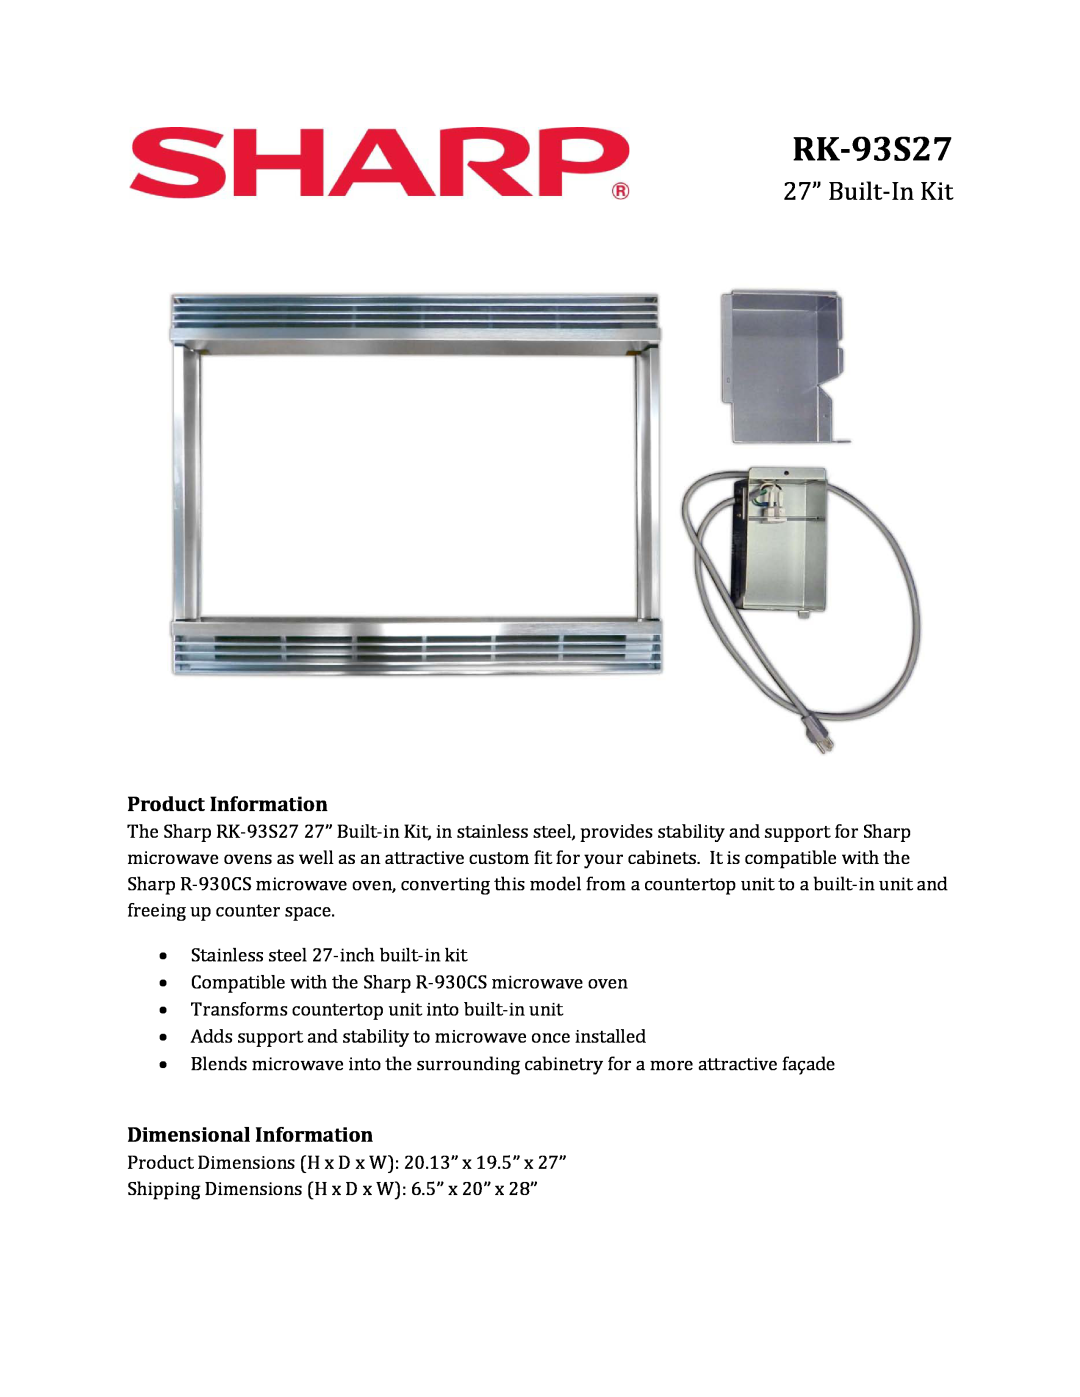 Sharp RK93S27 dimensions RK-93S27, 27” Built-In Kit, Product Information, Dimensional Information 